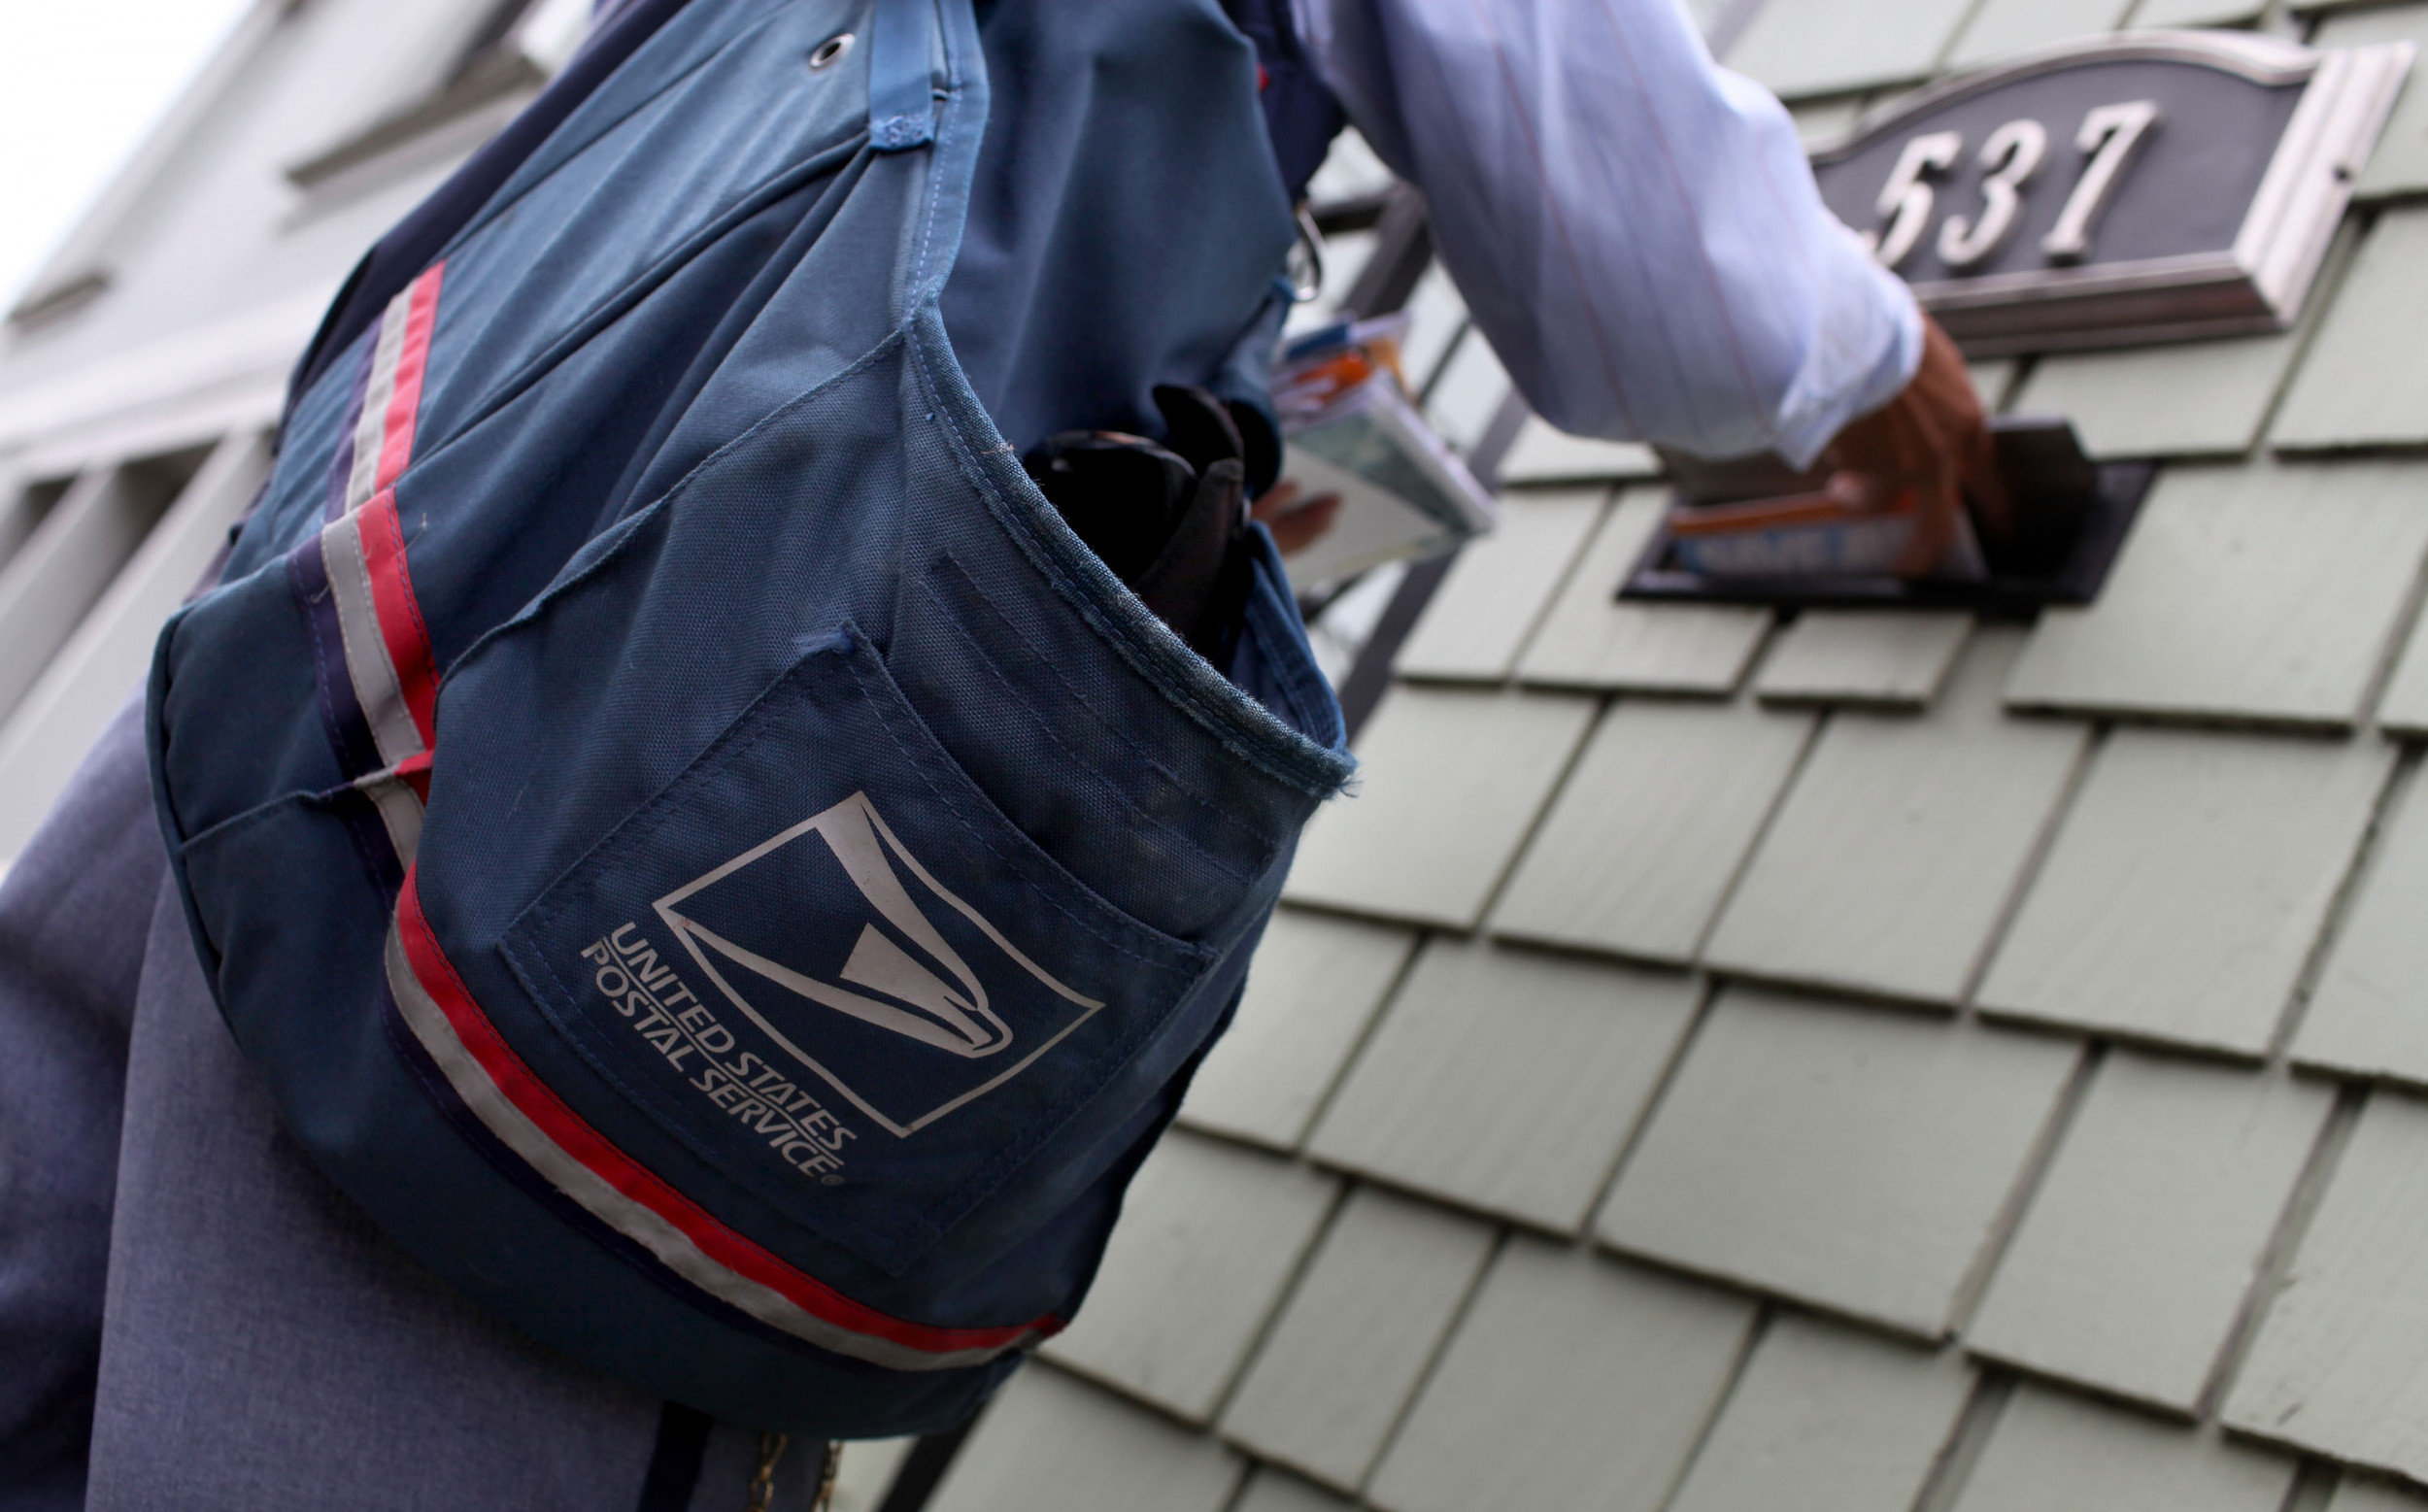 Is There Mail on Memorial Day? USPS, UPS, FedEx, Post Offices